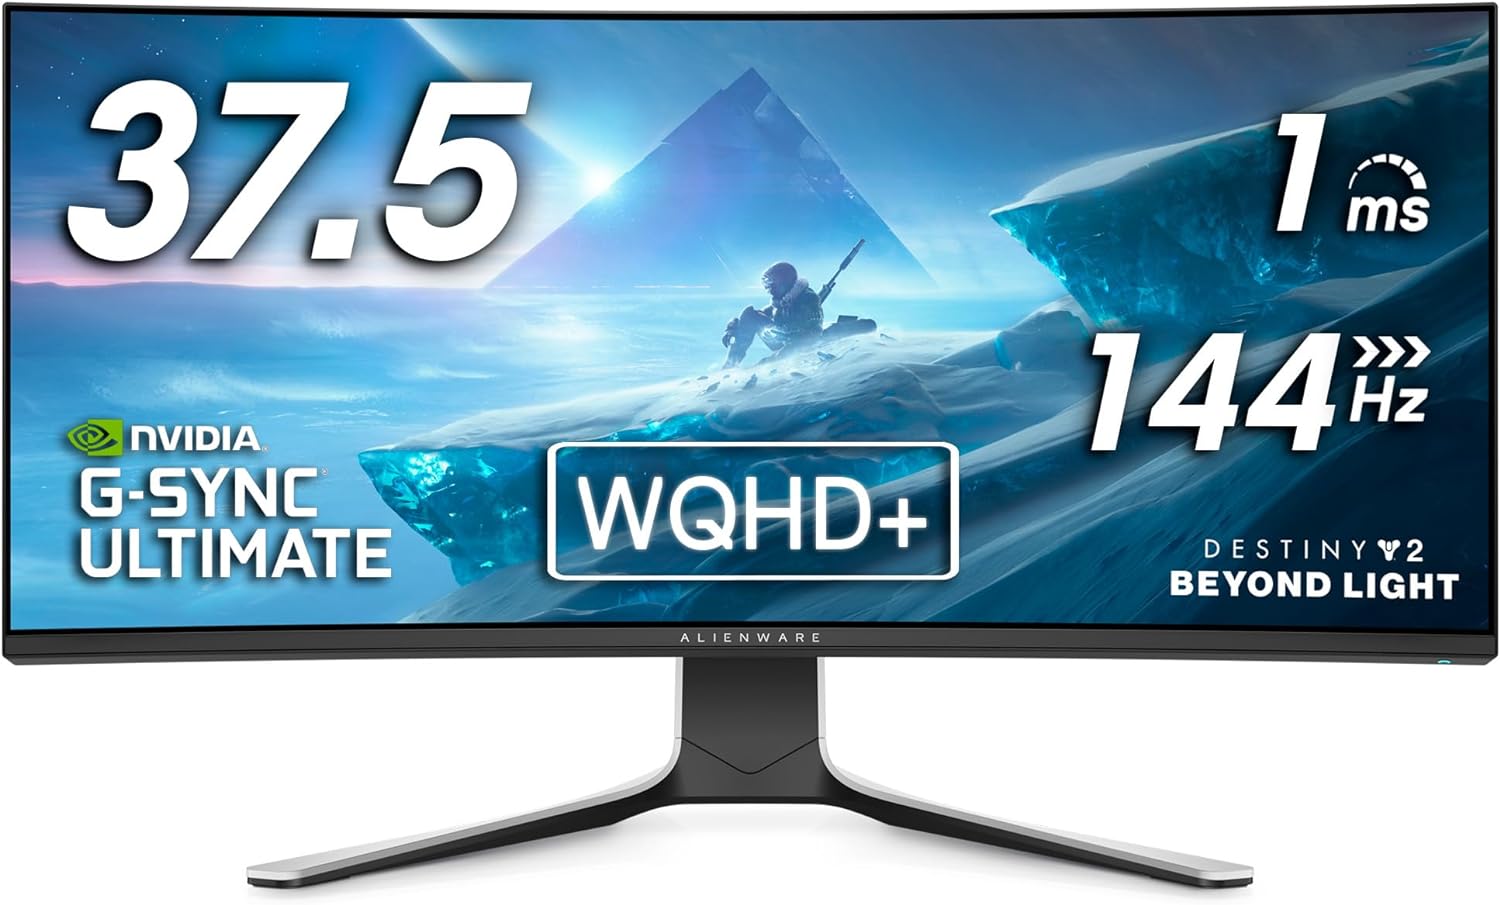 38" Alienware AW3821DW 3840x1600 144Hz IPS Curved Monitor $700